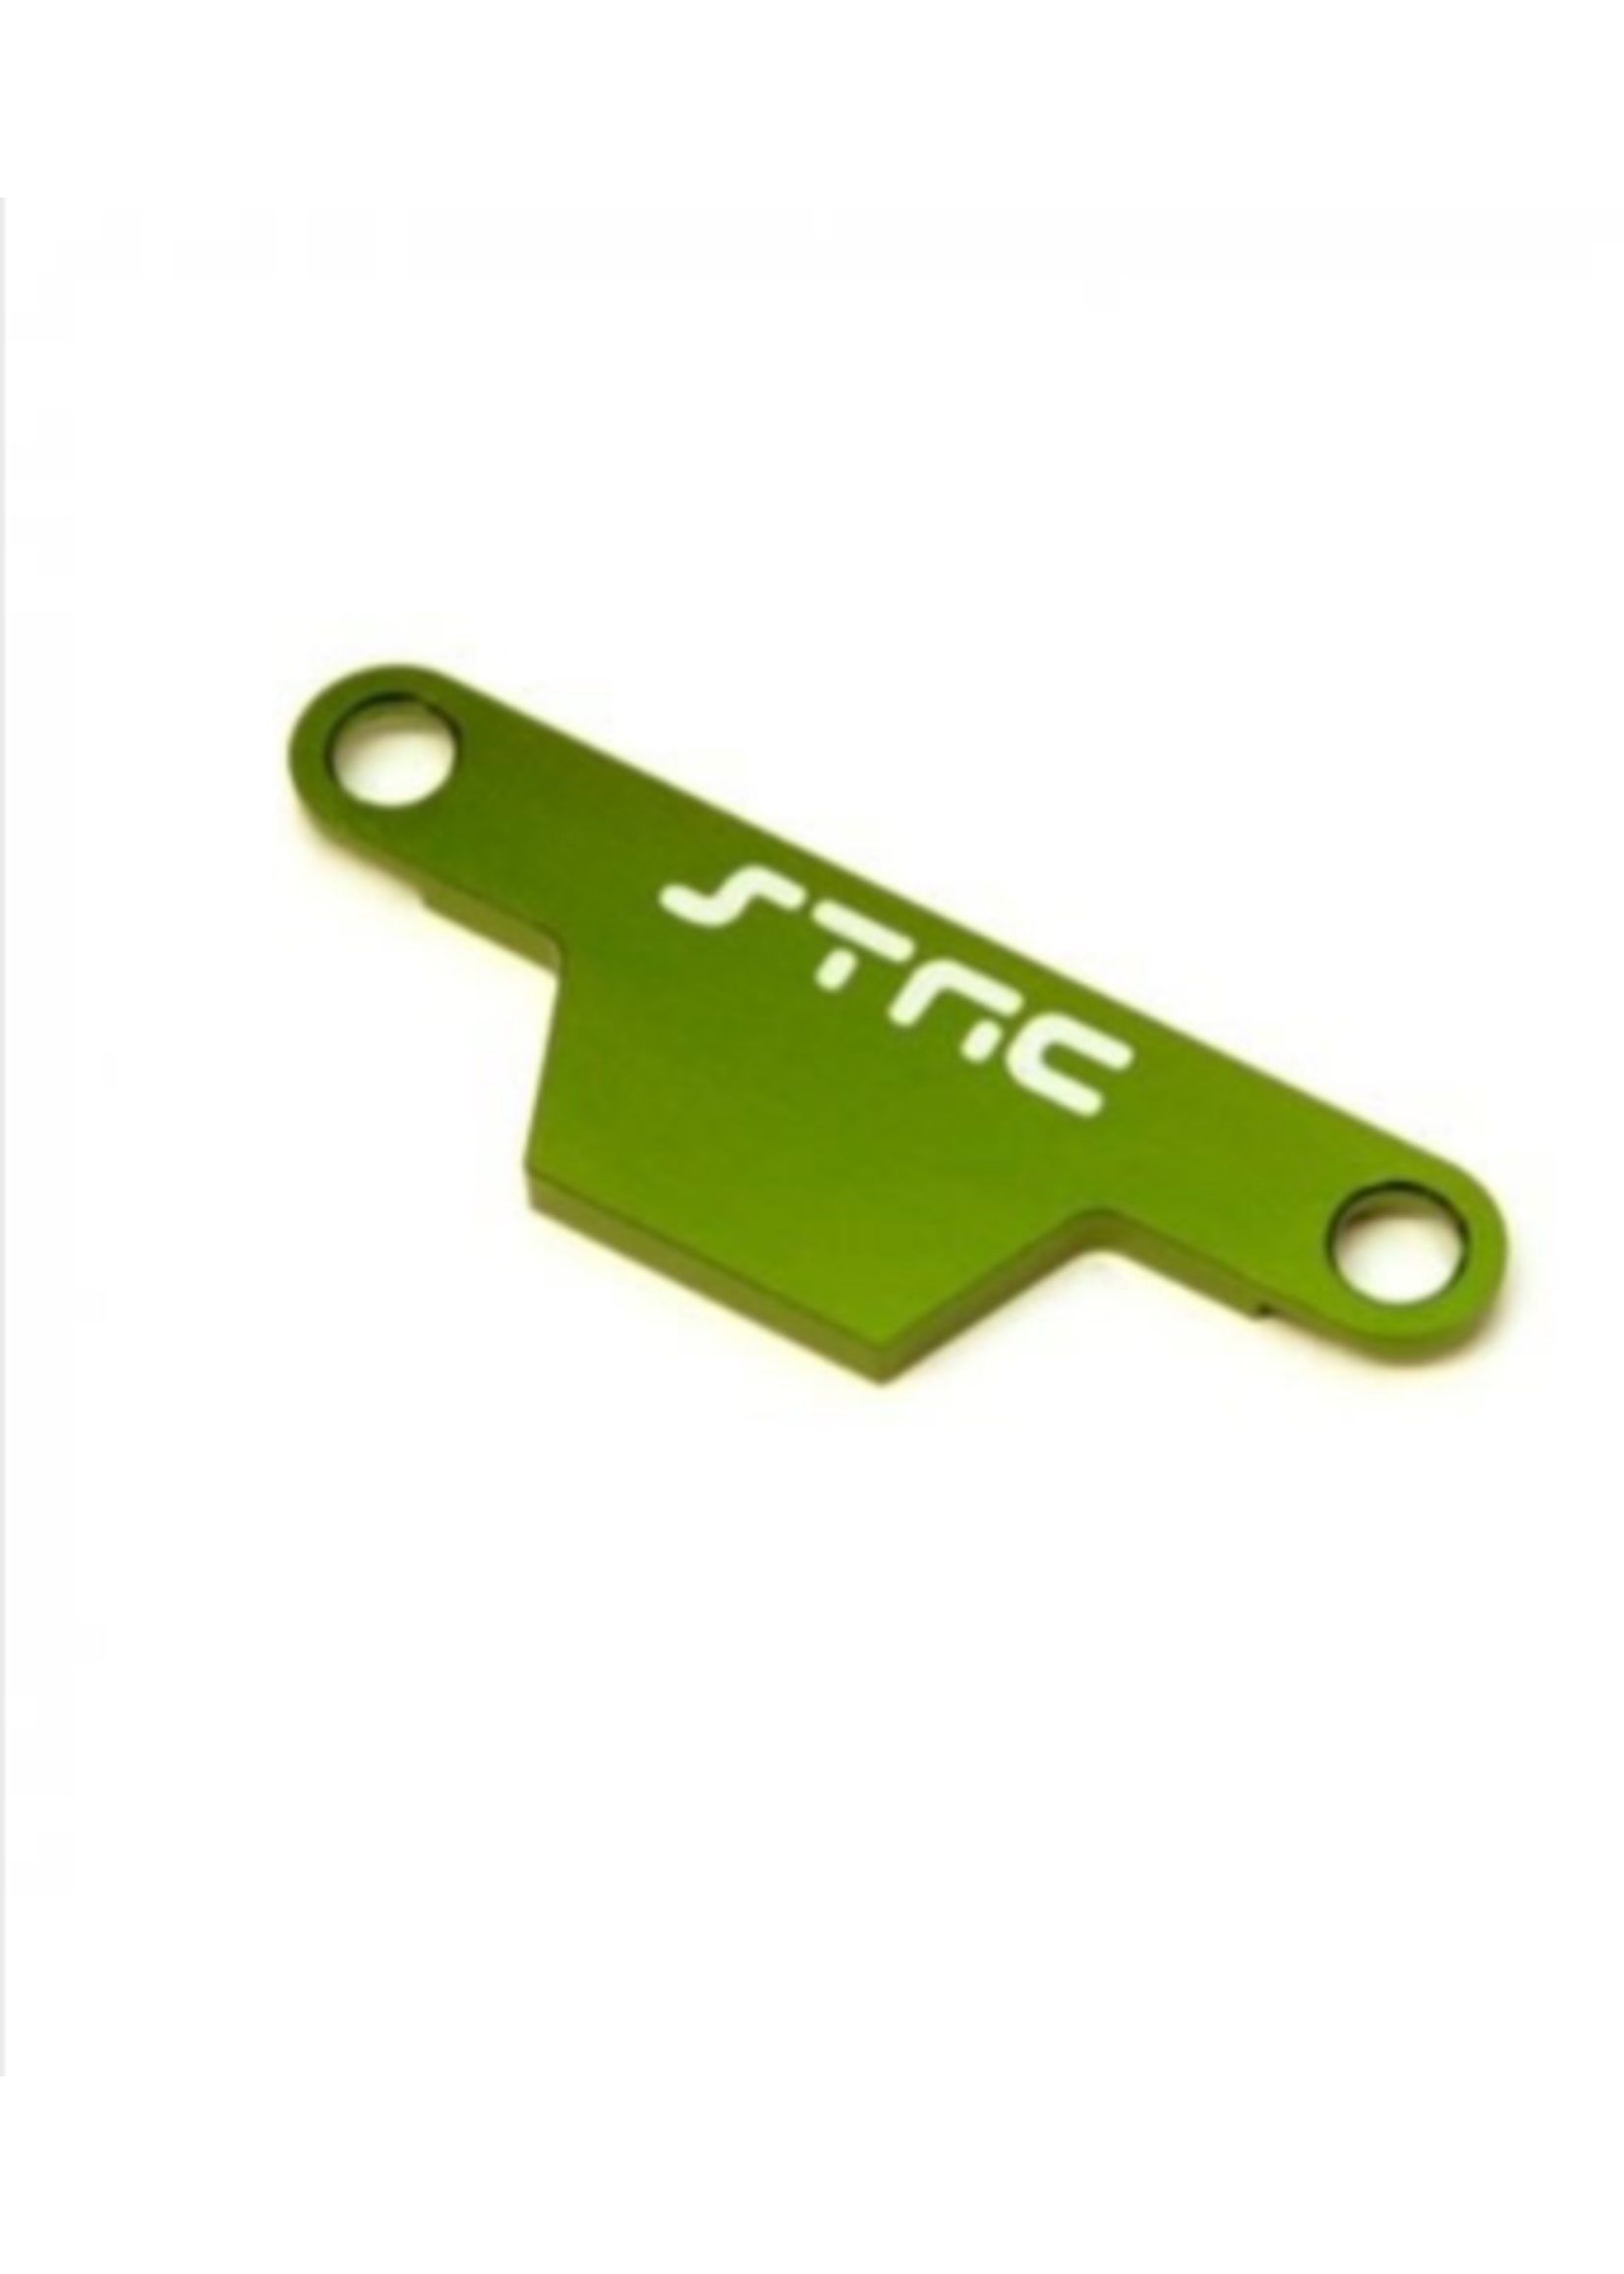 ST Racing Concepts SPTST3727AG ST Racing Concepts CNC Machined Alum. Battery Hold-down Plate for Rustler/Bandit (Green)